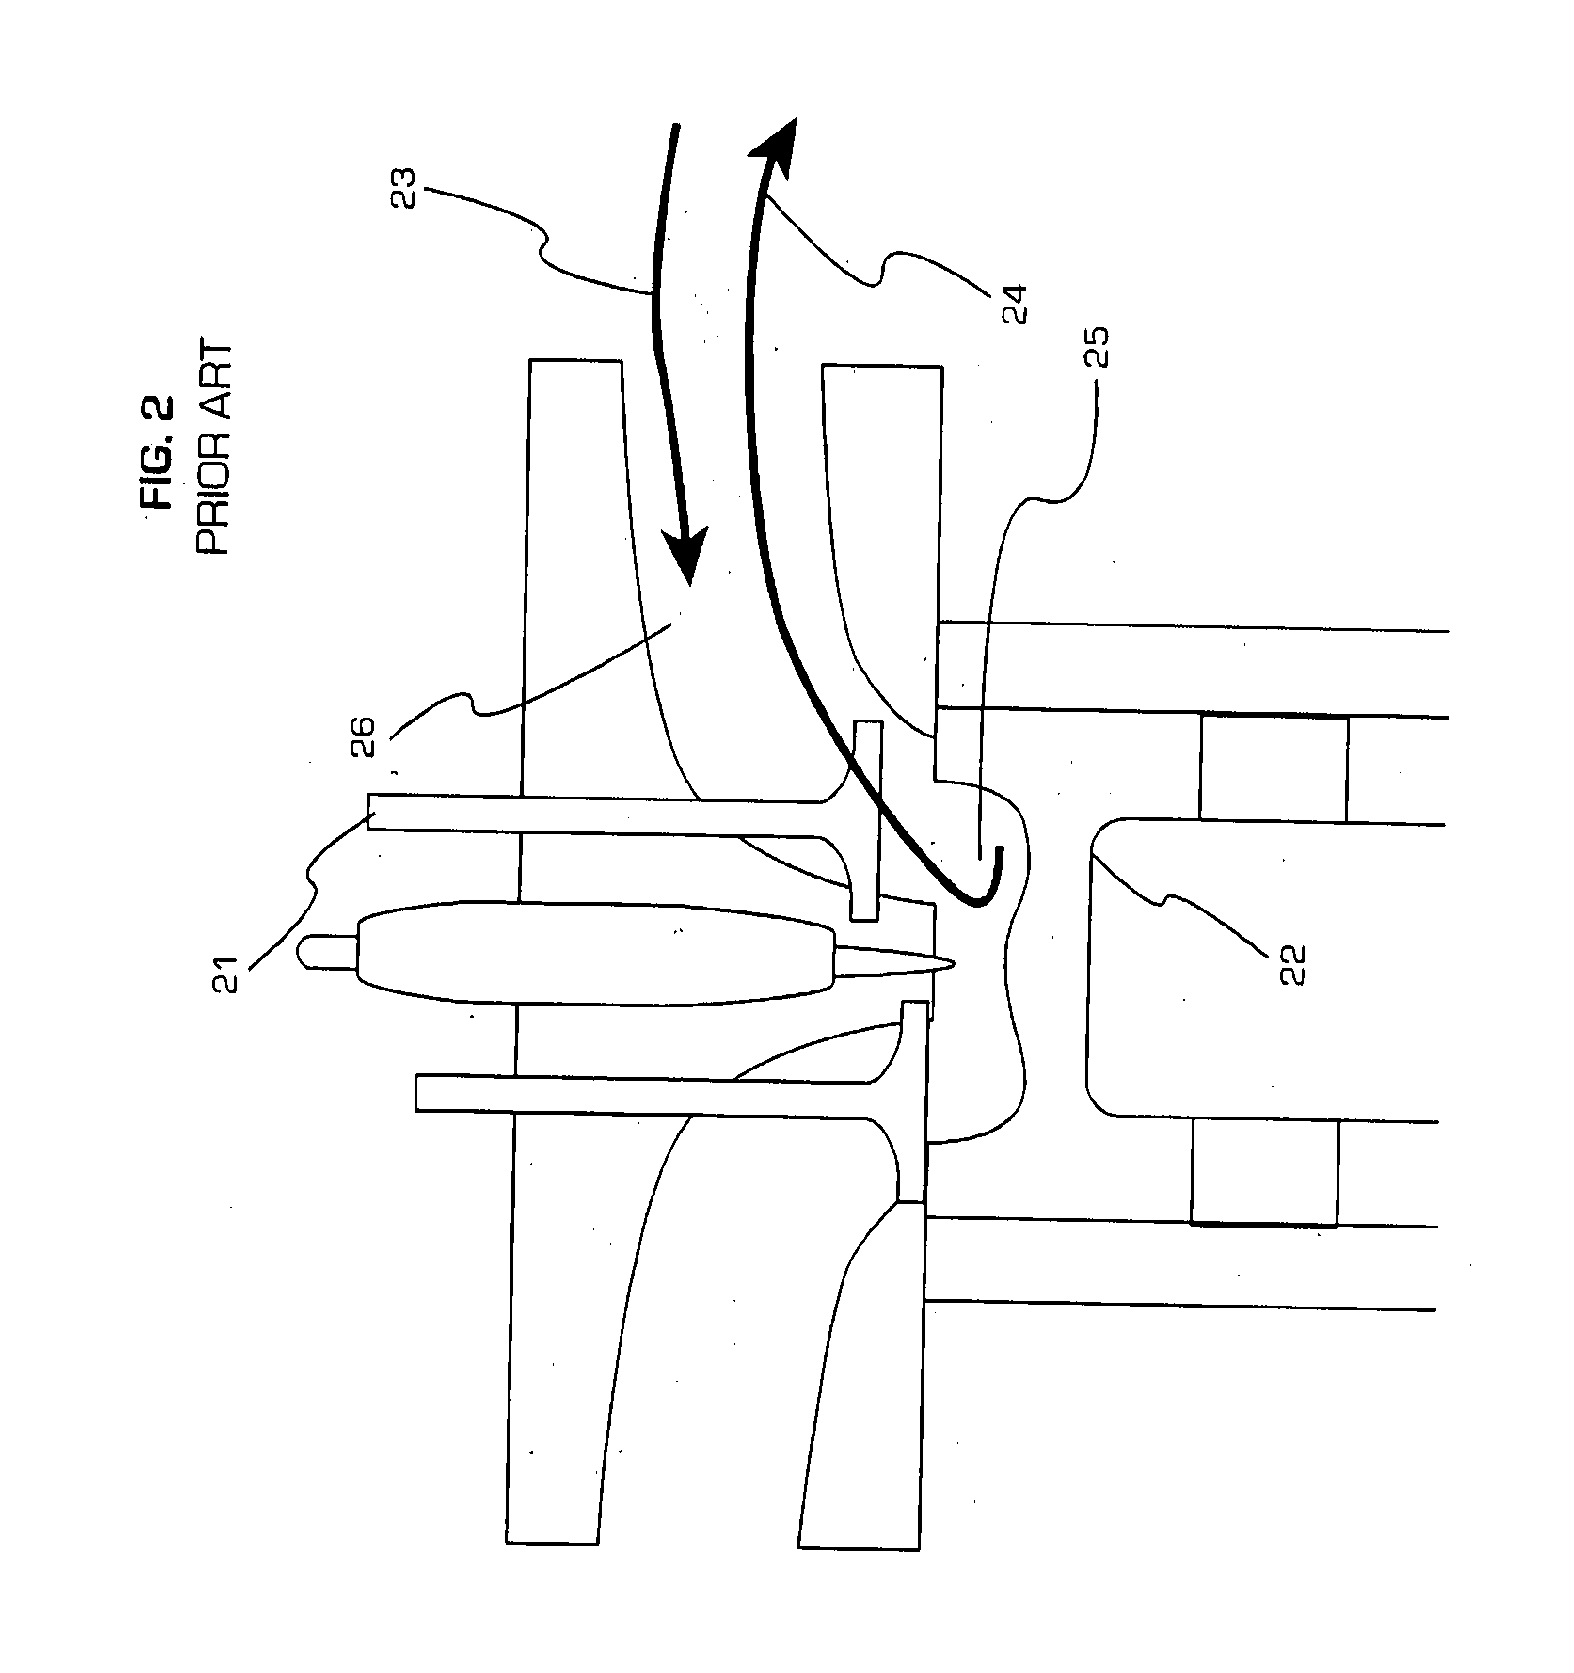 Internally cooled exhaust gas recirculation system for internal combustion engine and method thereof